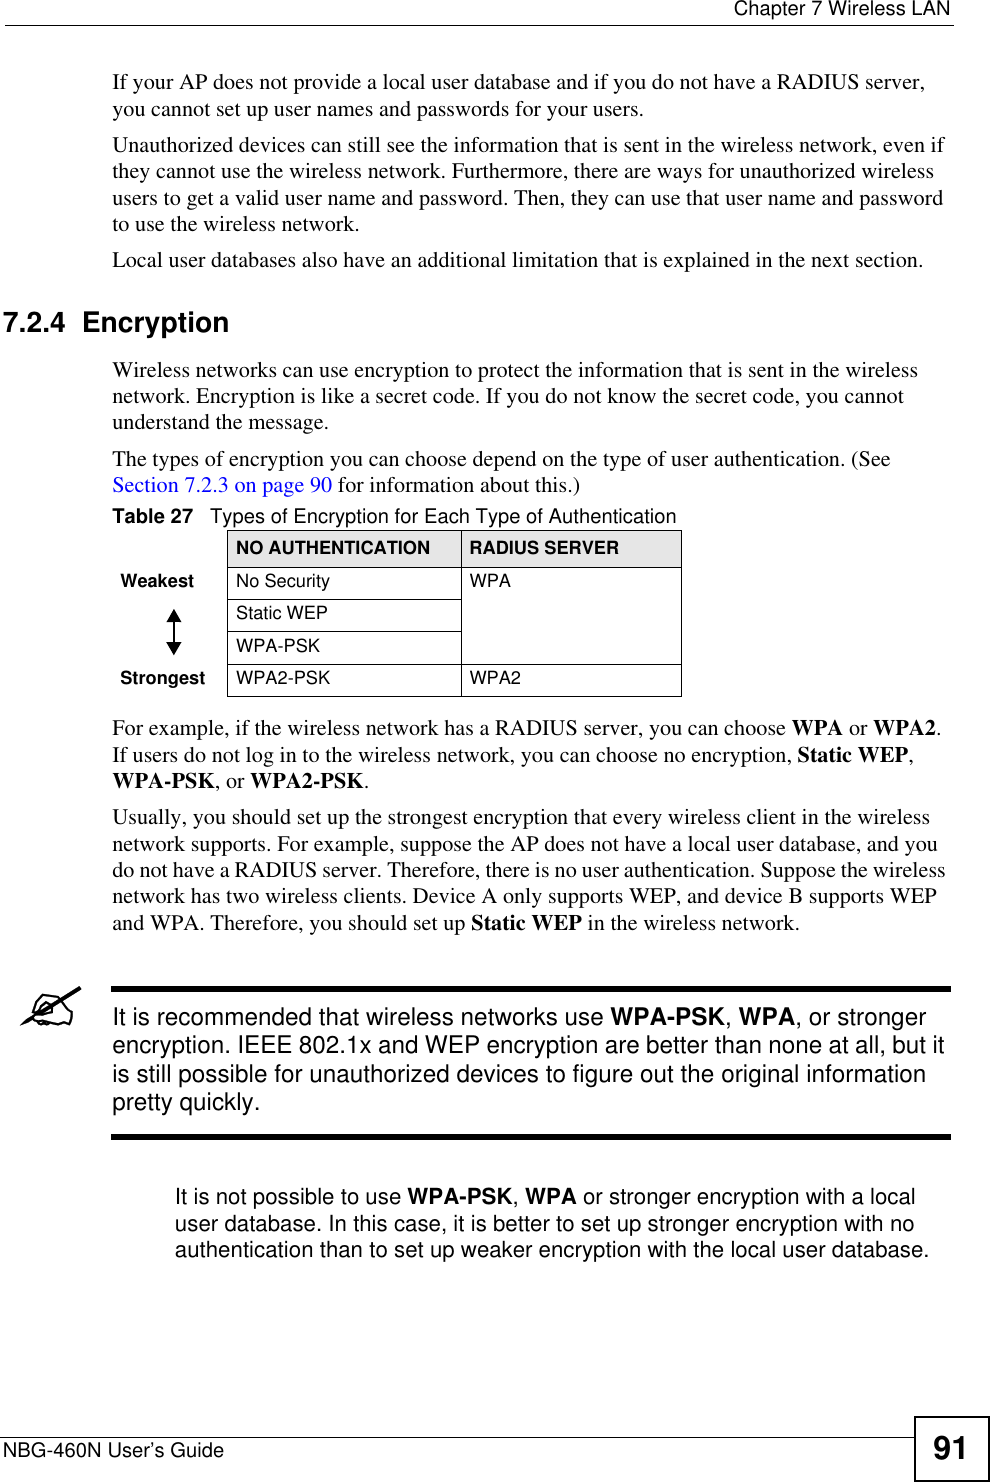  Chapter 7 Wireless LANNBG-460N User’s Guide 91If your AP does not provide a local user database and if you do not have a RADIUS server, you cannot set up user names and passwords for your users.Unauthorized devices can still see the information that is sent in the wireless network, even if they cannot use the wireless network. Furthermore, there are ways for unauthorized wireless users to get a valid user name and password. Then, they can use that user name and password to use the wireless network.Local user databases also have an additional limitation that is explained in the next section.7.2.4  EncryptionWireless networks can use encryption to protect the information that is sent in the wireless network. Encryption is like a secret code. If you do not know the secret code, you cannot understand the message.The types of encryption you can choose depend on the type of user authentication. (See Section 7.2.3 on page 90 for information about this.)For example, if the wireless network has a RADIUS server, you can choose WPA or WPA2.If users do not log in to the wireless network, you can choose no encryption, Static WEP,WPA-PSK, or WPA2-PSK.Usually, you should set up the strongest encryption that every wireless client in the wireless network supports. For example, suppose the AP does not have a local user database, and you do not have a RADIUS server. Therefore, there is no user authentication. Suppose the wireless network has two wireless clients. Device A only supports WEP, and device B supports WEP and WPA. Therefore, you should set up Static WEP in the wireless network.&quot;It is recommended that wireless networks use WPA-PSK,WPA, or stronger encryption. IEEE 802.1x and WEP encryption are better than none at all, but it is still possible for unauthorized devices to figure out the original information pretty quickly.It is not possible to use WPA-PSK,WPA or stronger encryption with a local user database. In this case, it is better to set up stronger encryption with no authentication than to set up weaker encryption with the local user database.Table 27   Types of Encryption for Each Type of AuthenticationNO AUTHENTICATION RADIUS SERVERWeakest No Security WPAStatic WEPWPA-PSKStrongest WPA2-PSK WPA2